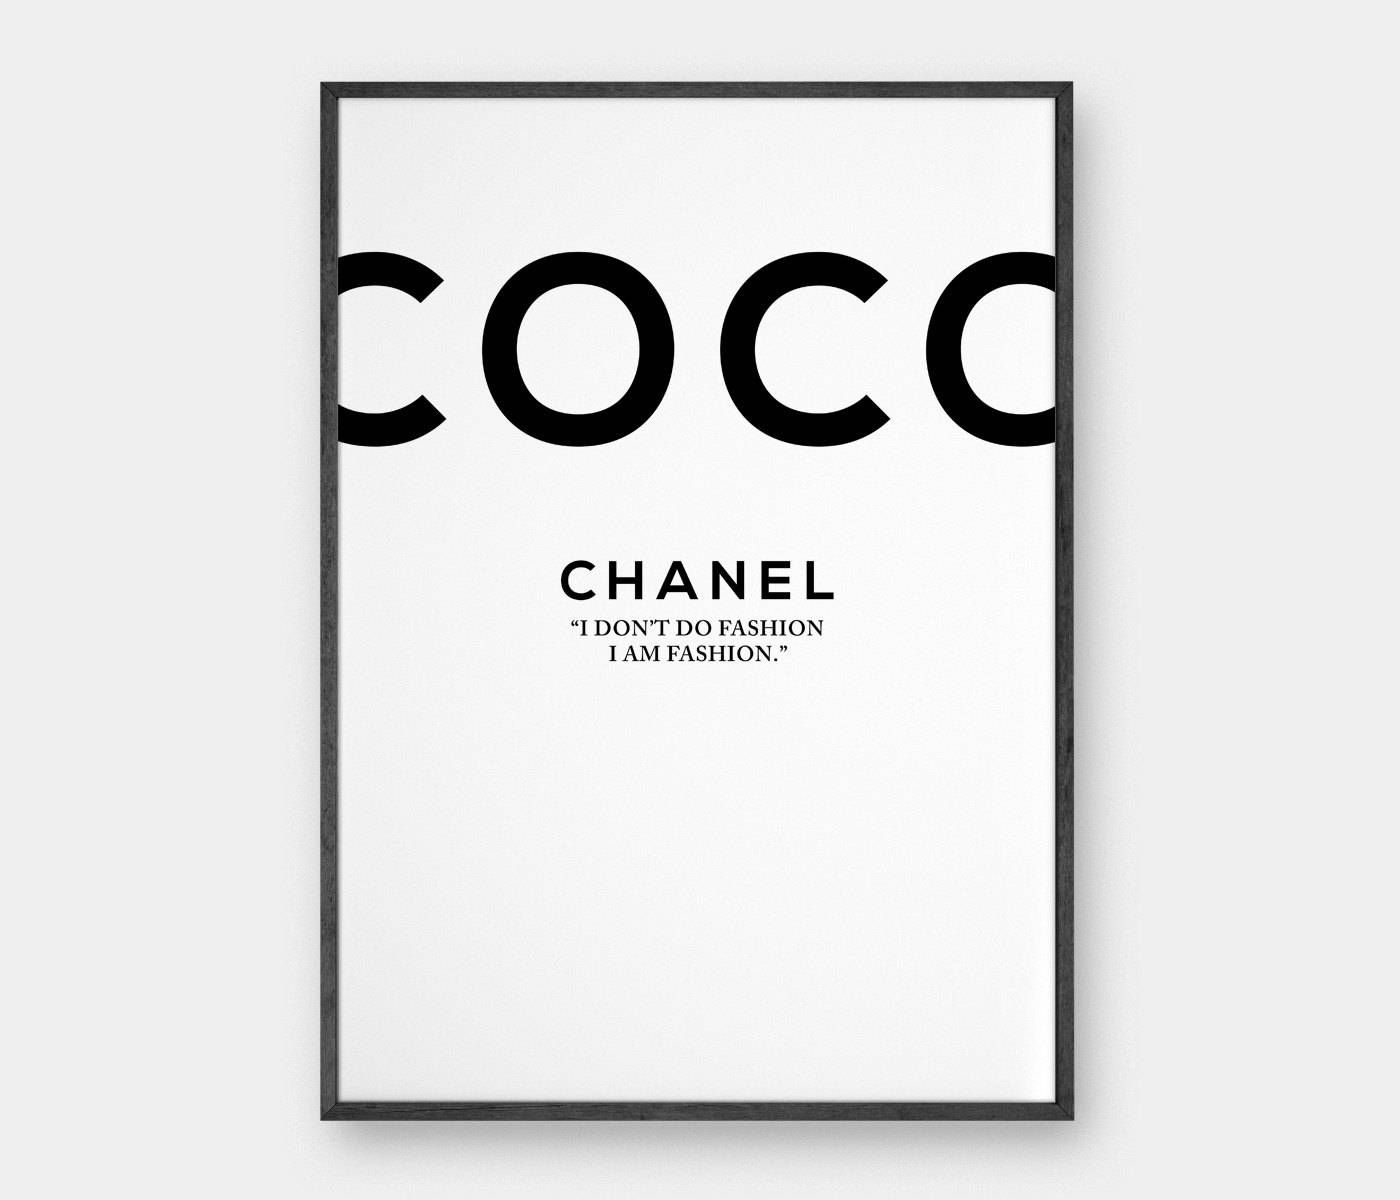 Coco Wall Art Chanel Prints Chanel Quote Coco Prints Pertaining To 2018 Coco Chanel Wall Stickers (Gallery 26 of 30)